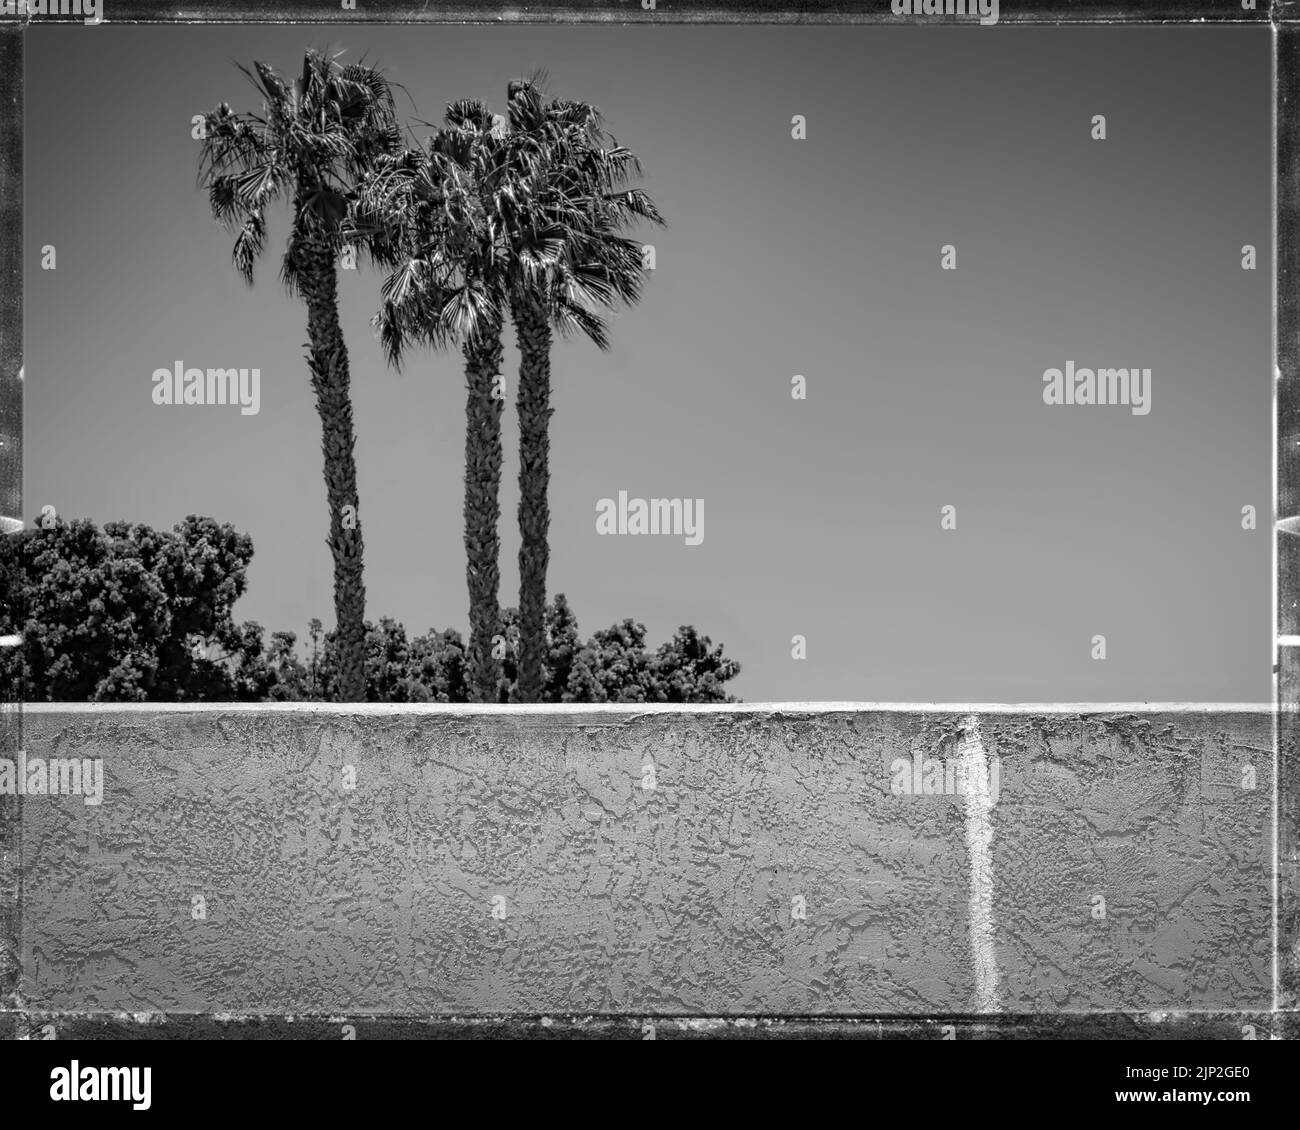 A cracked wall with palm trees on the other side at the Silver Strand in Coronado, California. Stock Photo